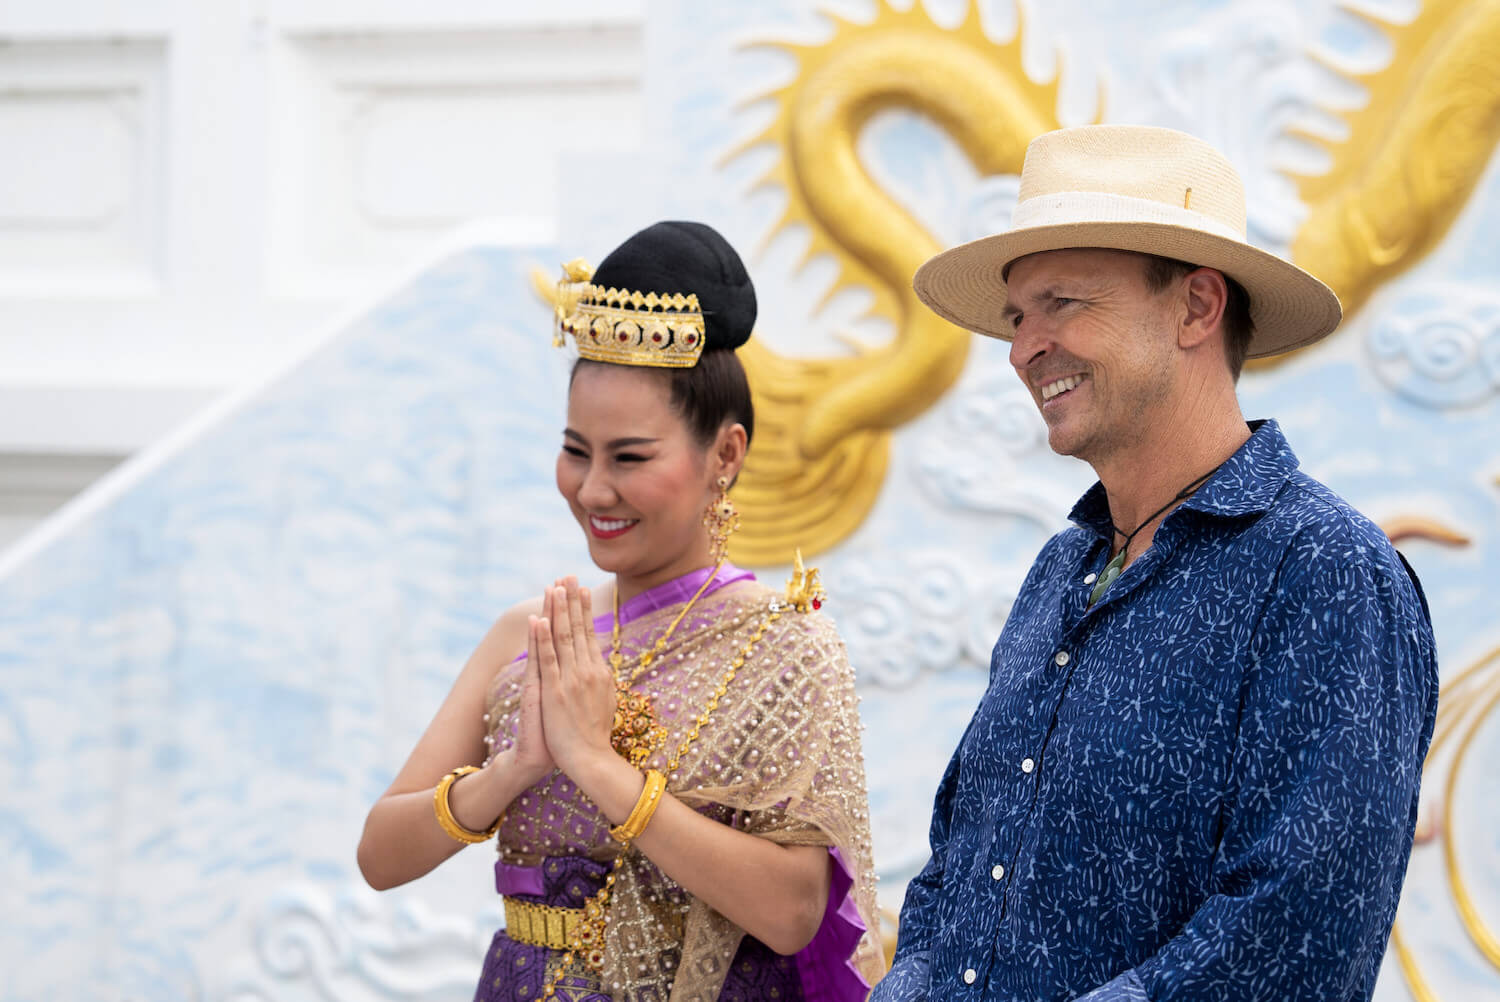 Phil Keoghan standing at the end of the first leg with a woman from Thailand in 'The Amazing Race' Season 35